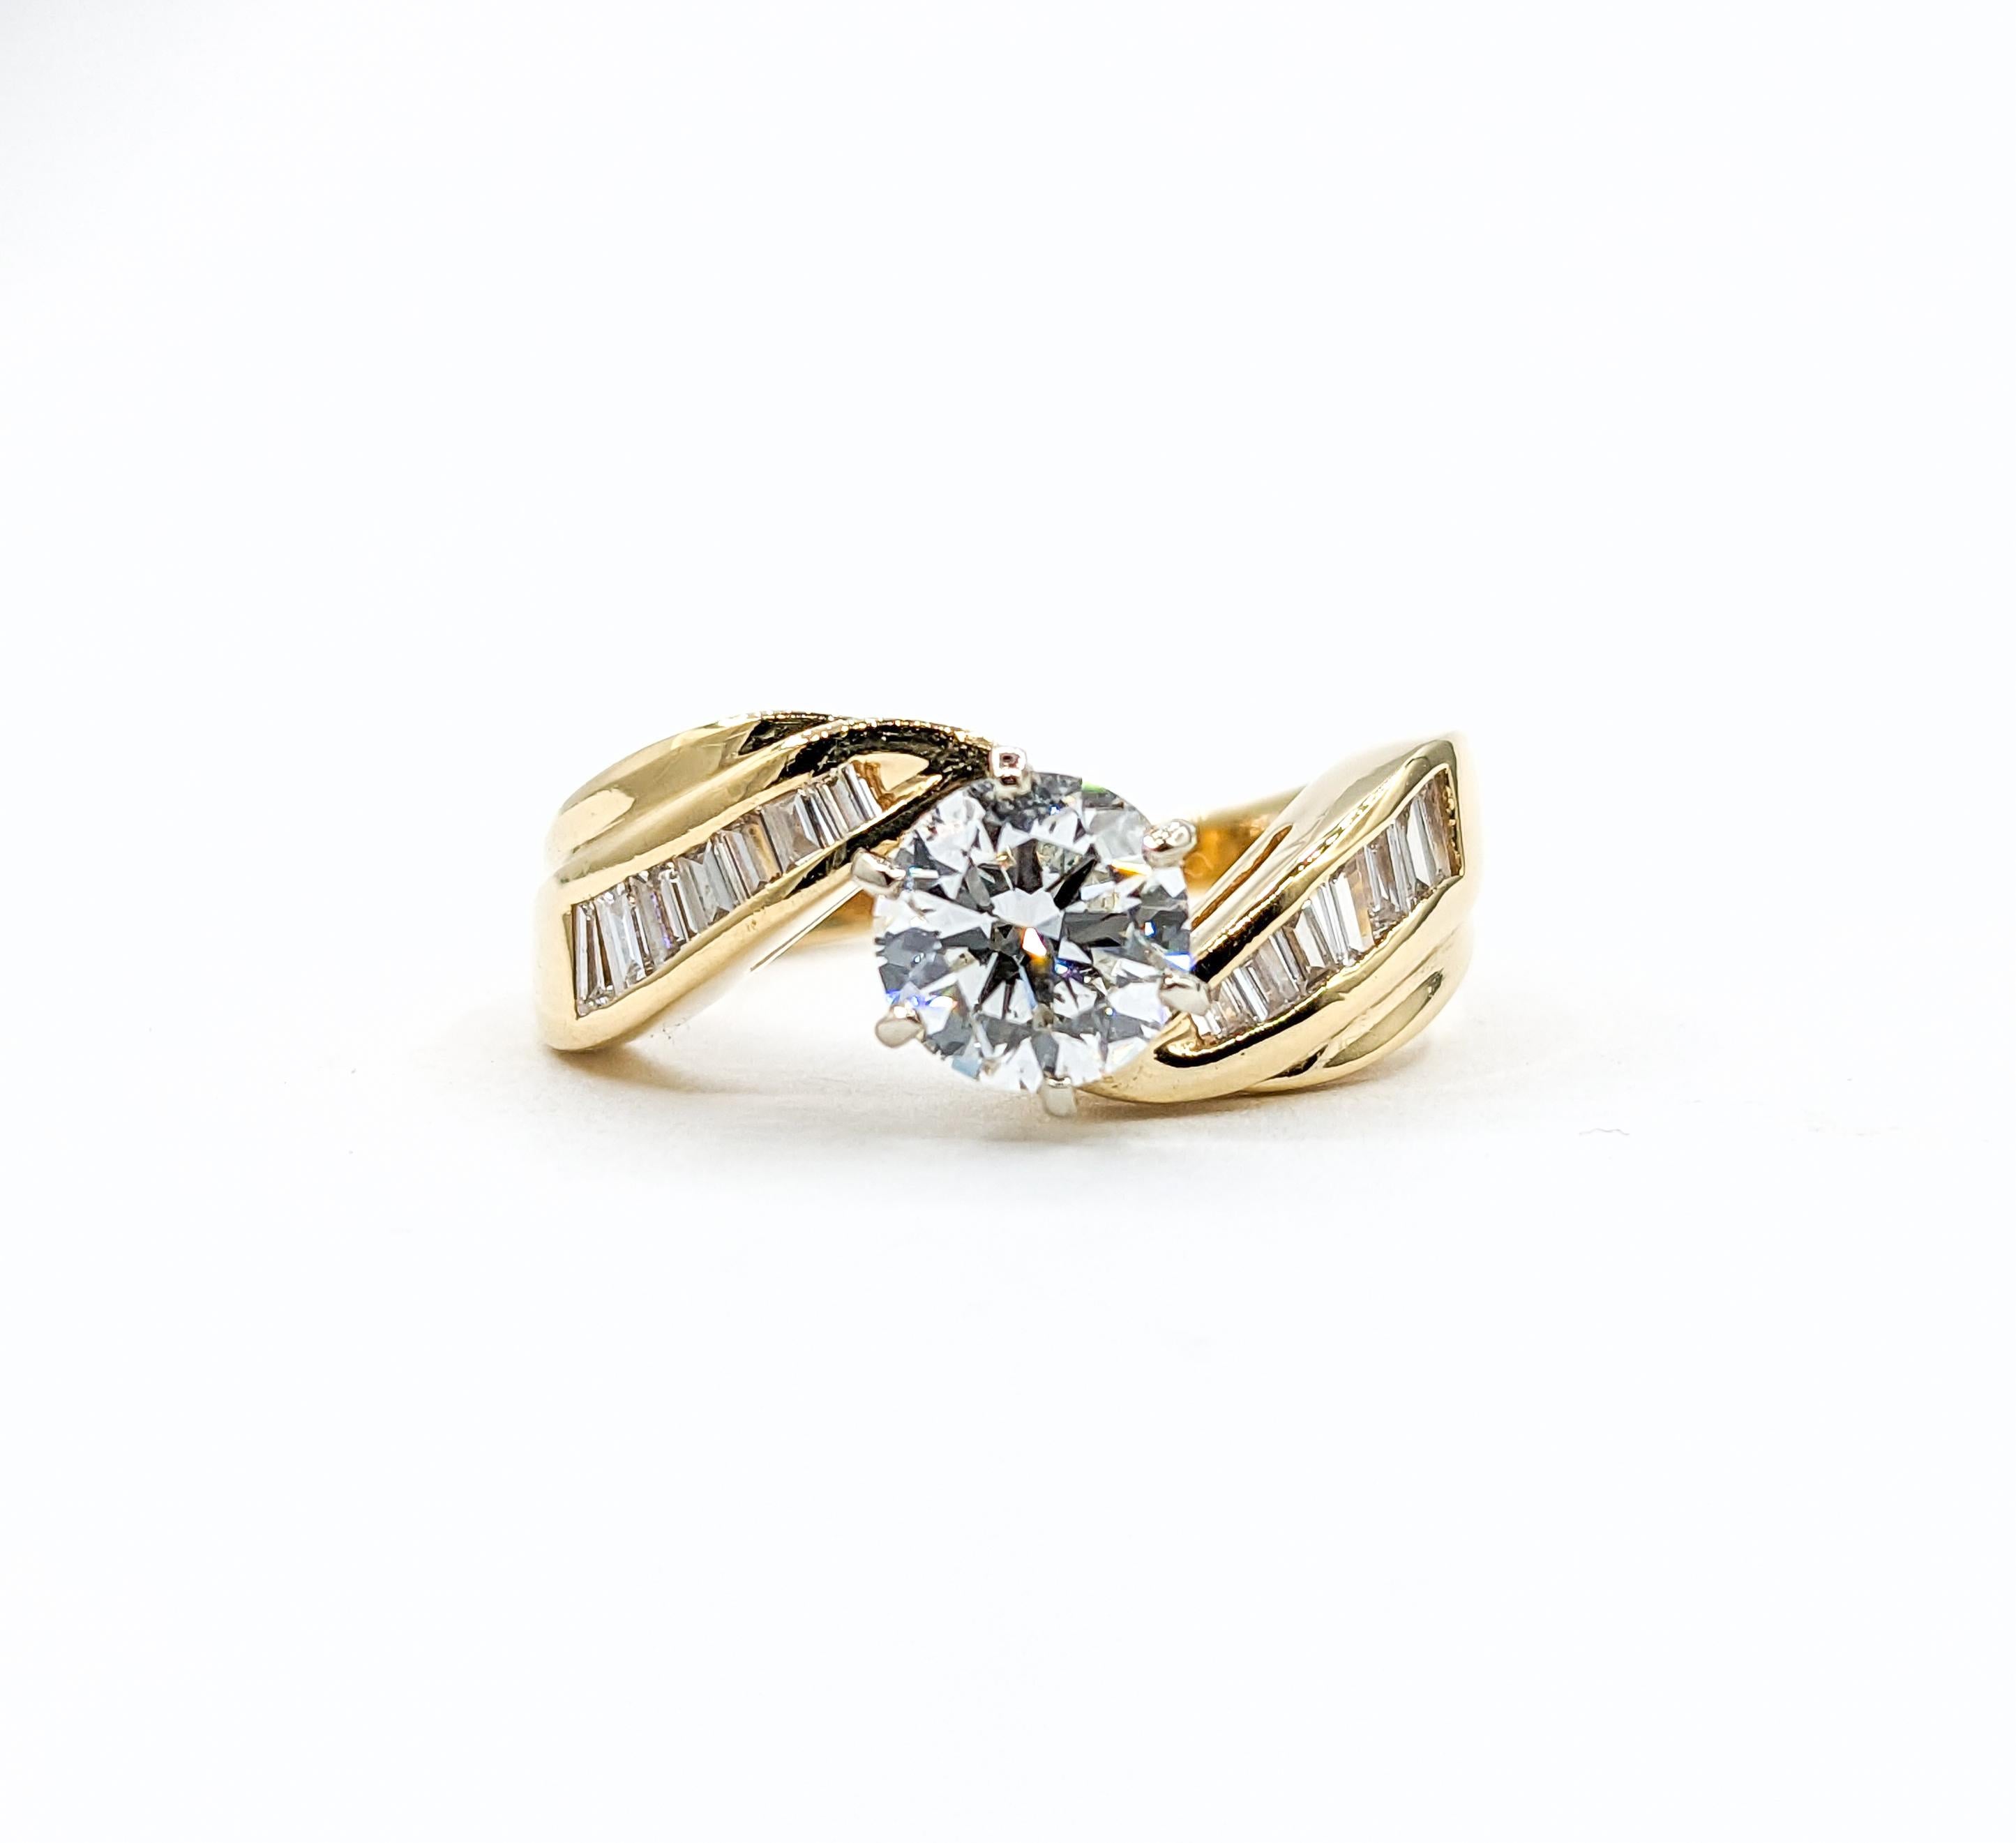 1.40ctw Diamond Engagement Ring In Yellow Gold

Introducing an exquisite Ring, meticulously crafted in 14kt Yellow Gold, adorned with a dazzling 1.00ct Round Diamond. The Sparkly Diamond showcases SI2 clarity and a Colorless white brilliance (F-G